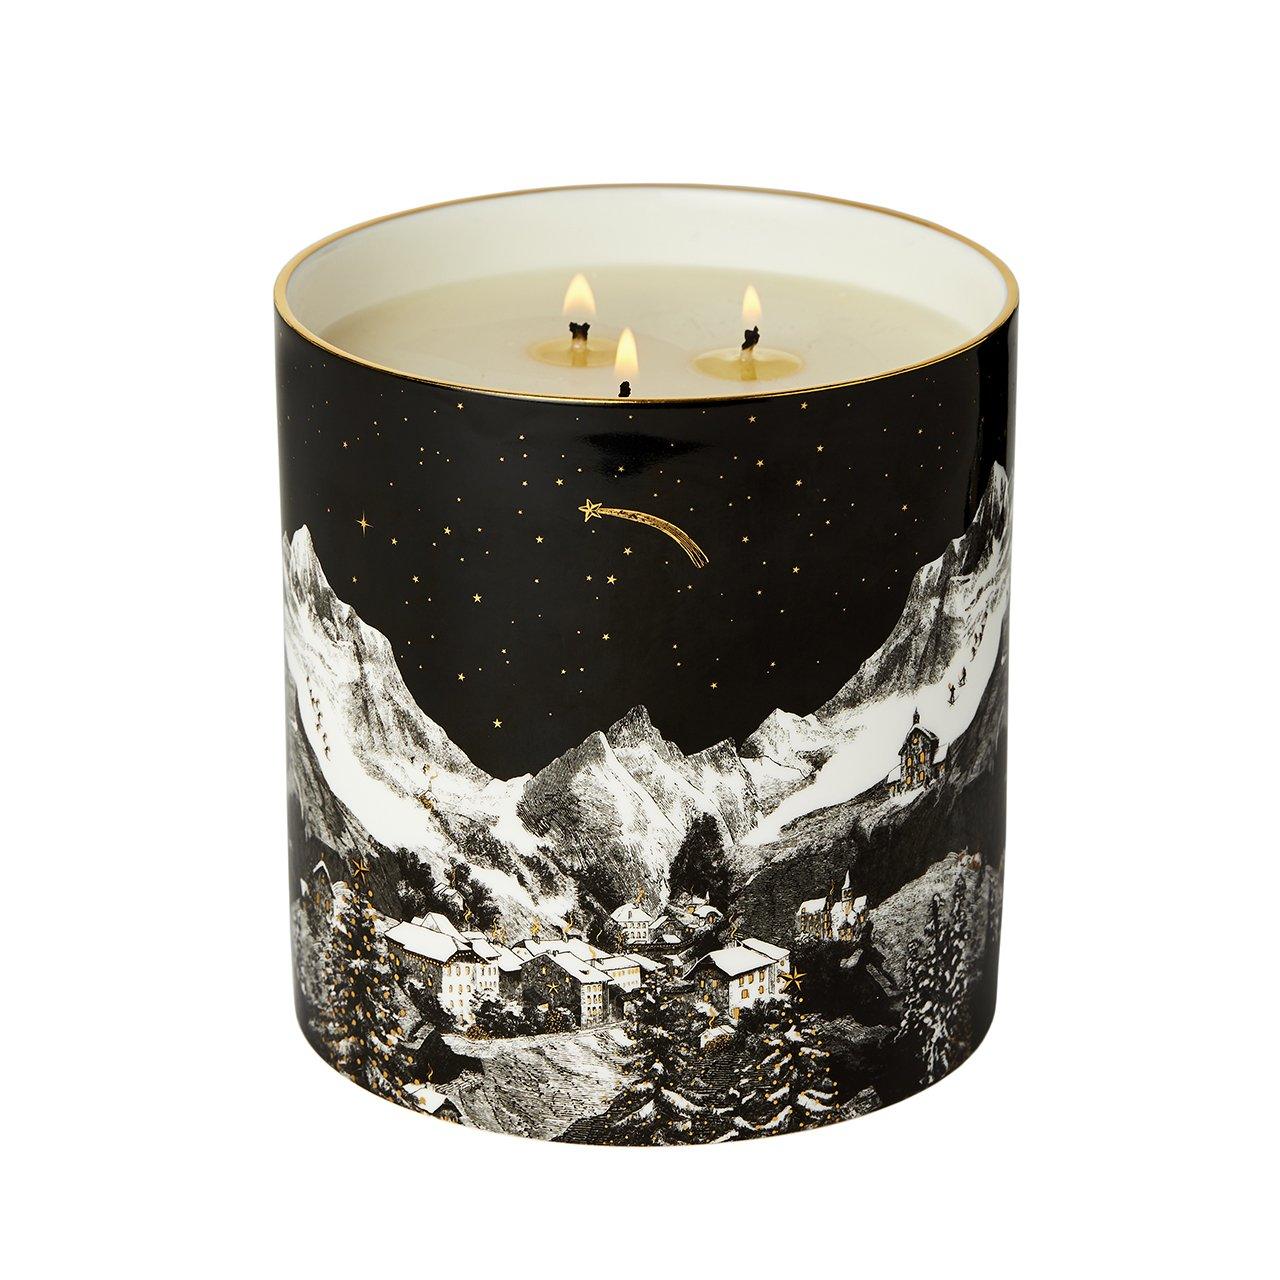 The Alpine Lodge 3 Wick Scented Ceramic Candle